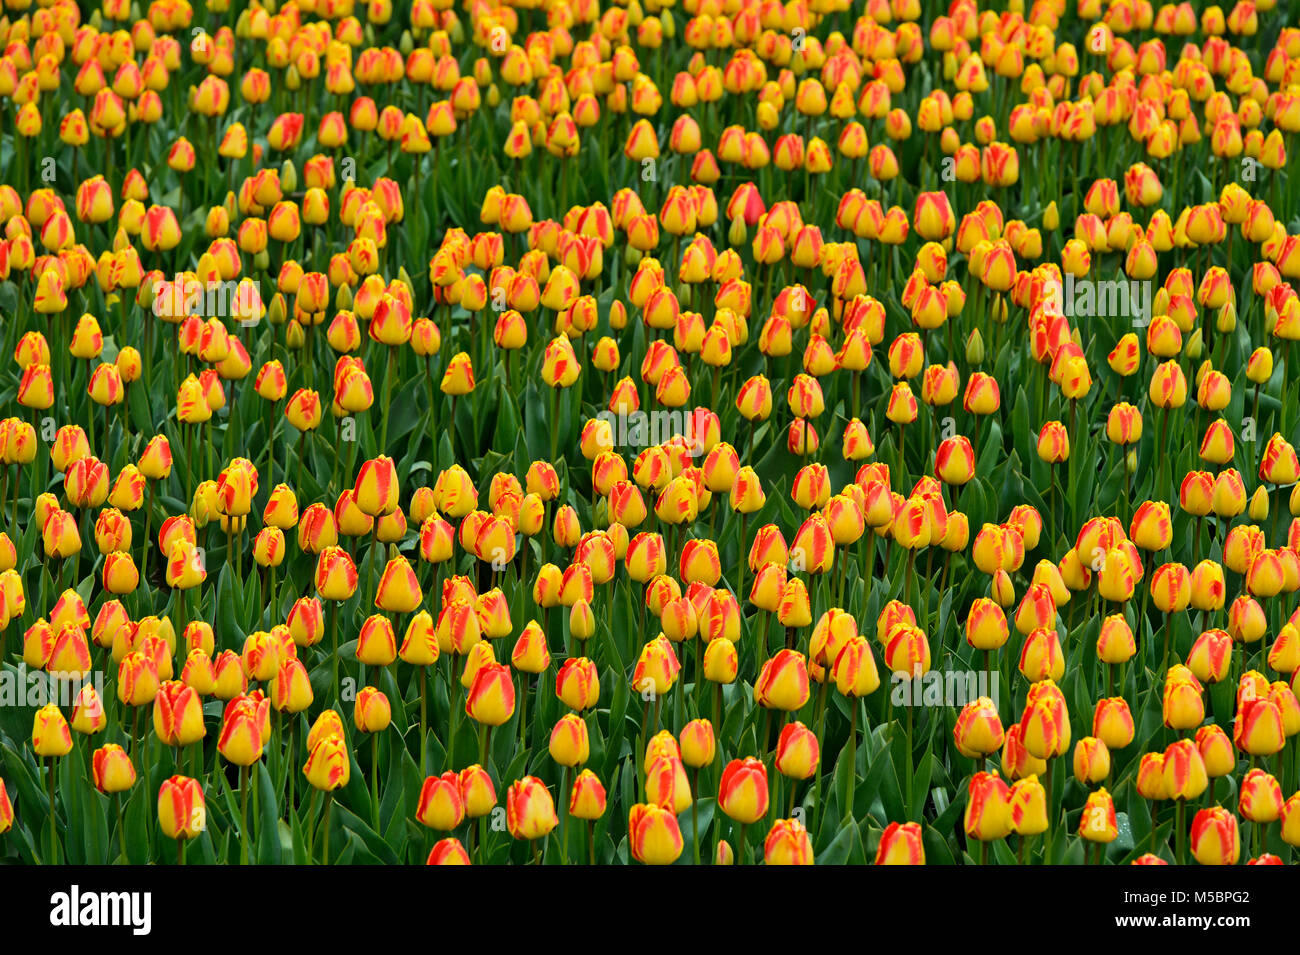 Field of Tulip flowers for the production of tulip bulbs, Bollenstreek, Netherlands Stock Photo